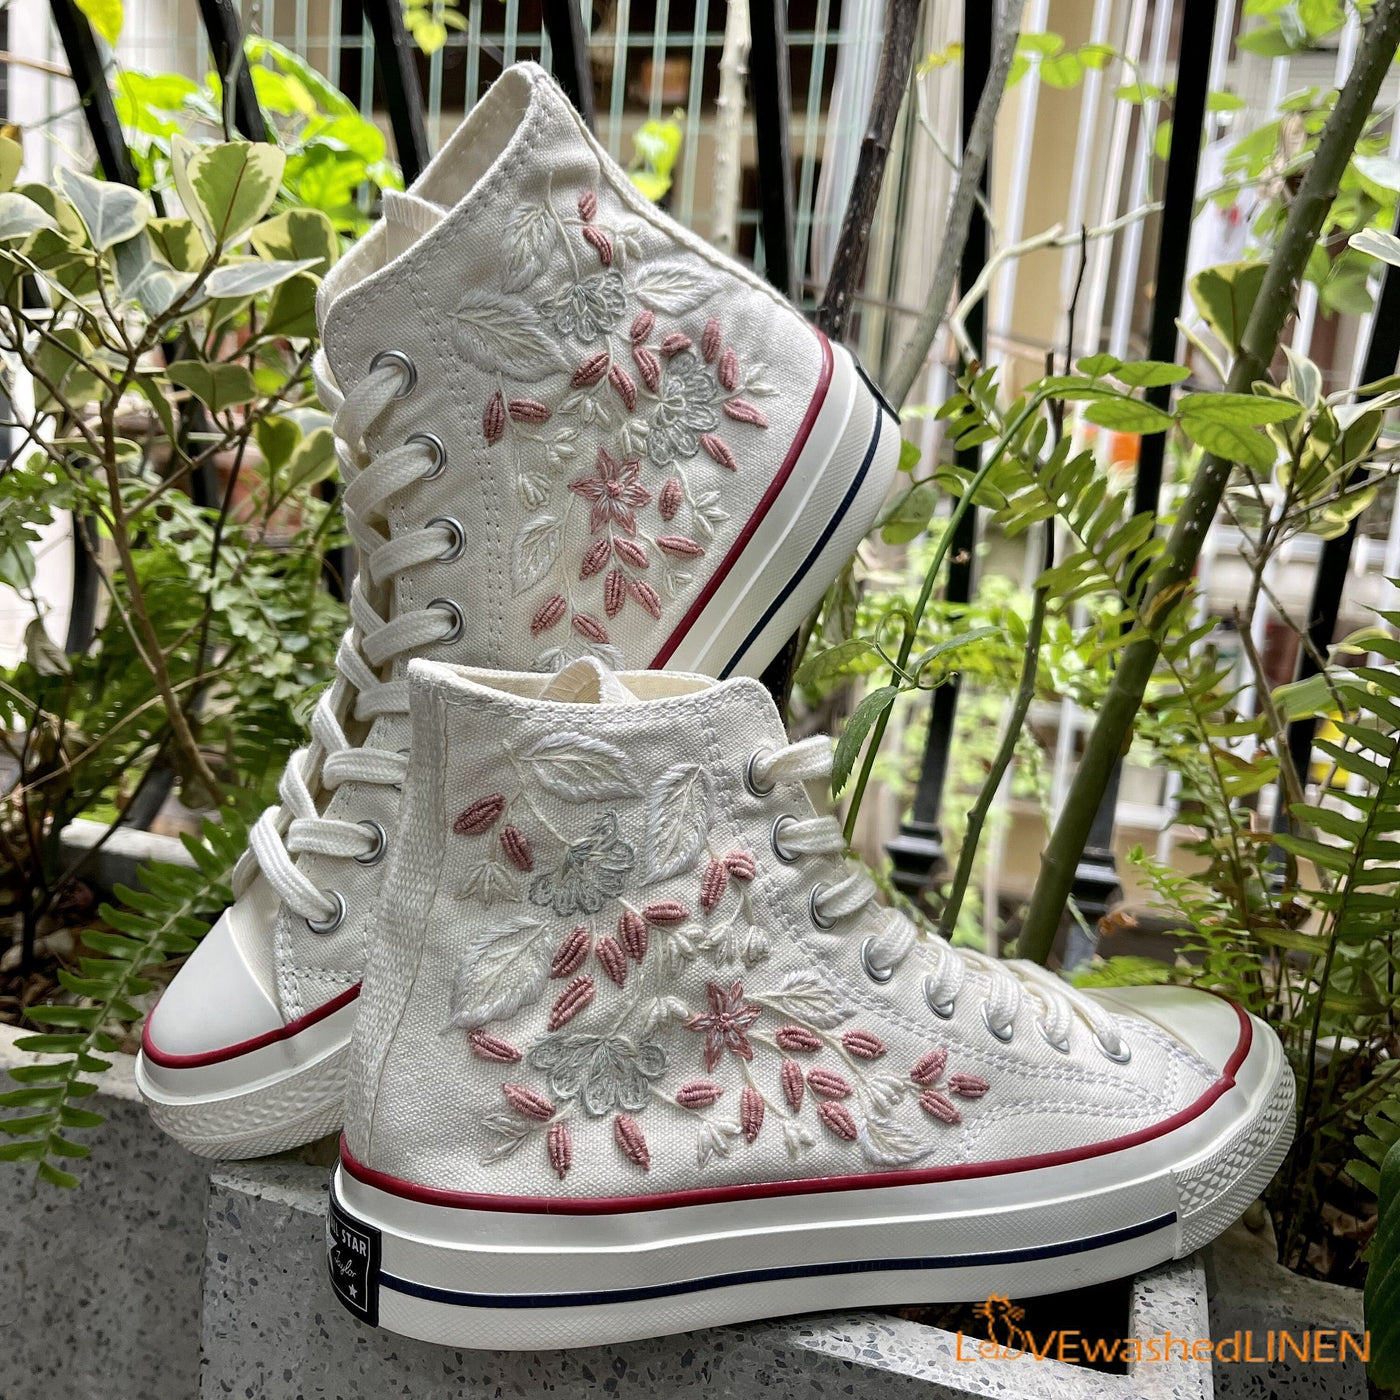 Custom Coverse Chuck Taylor Wedding Flower Embroidered Converse Bridal